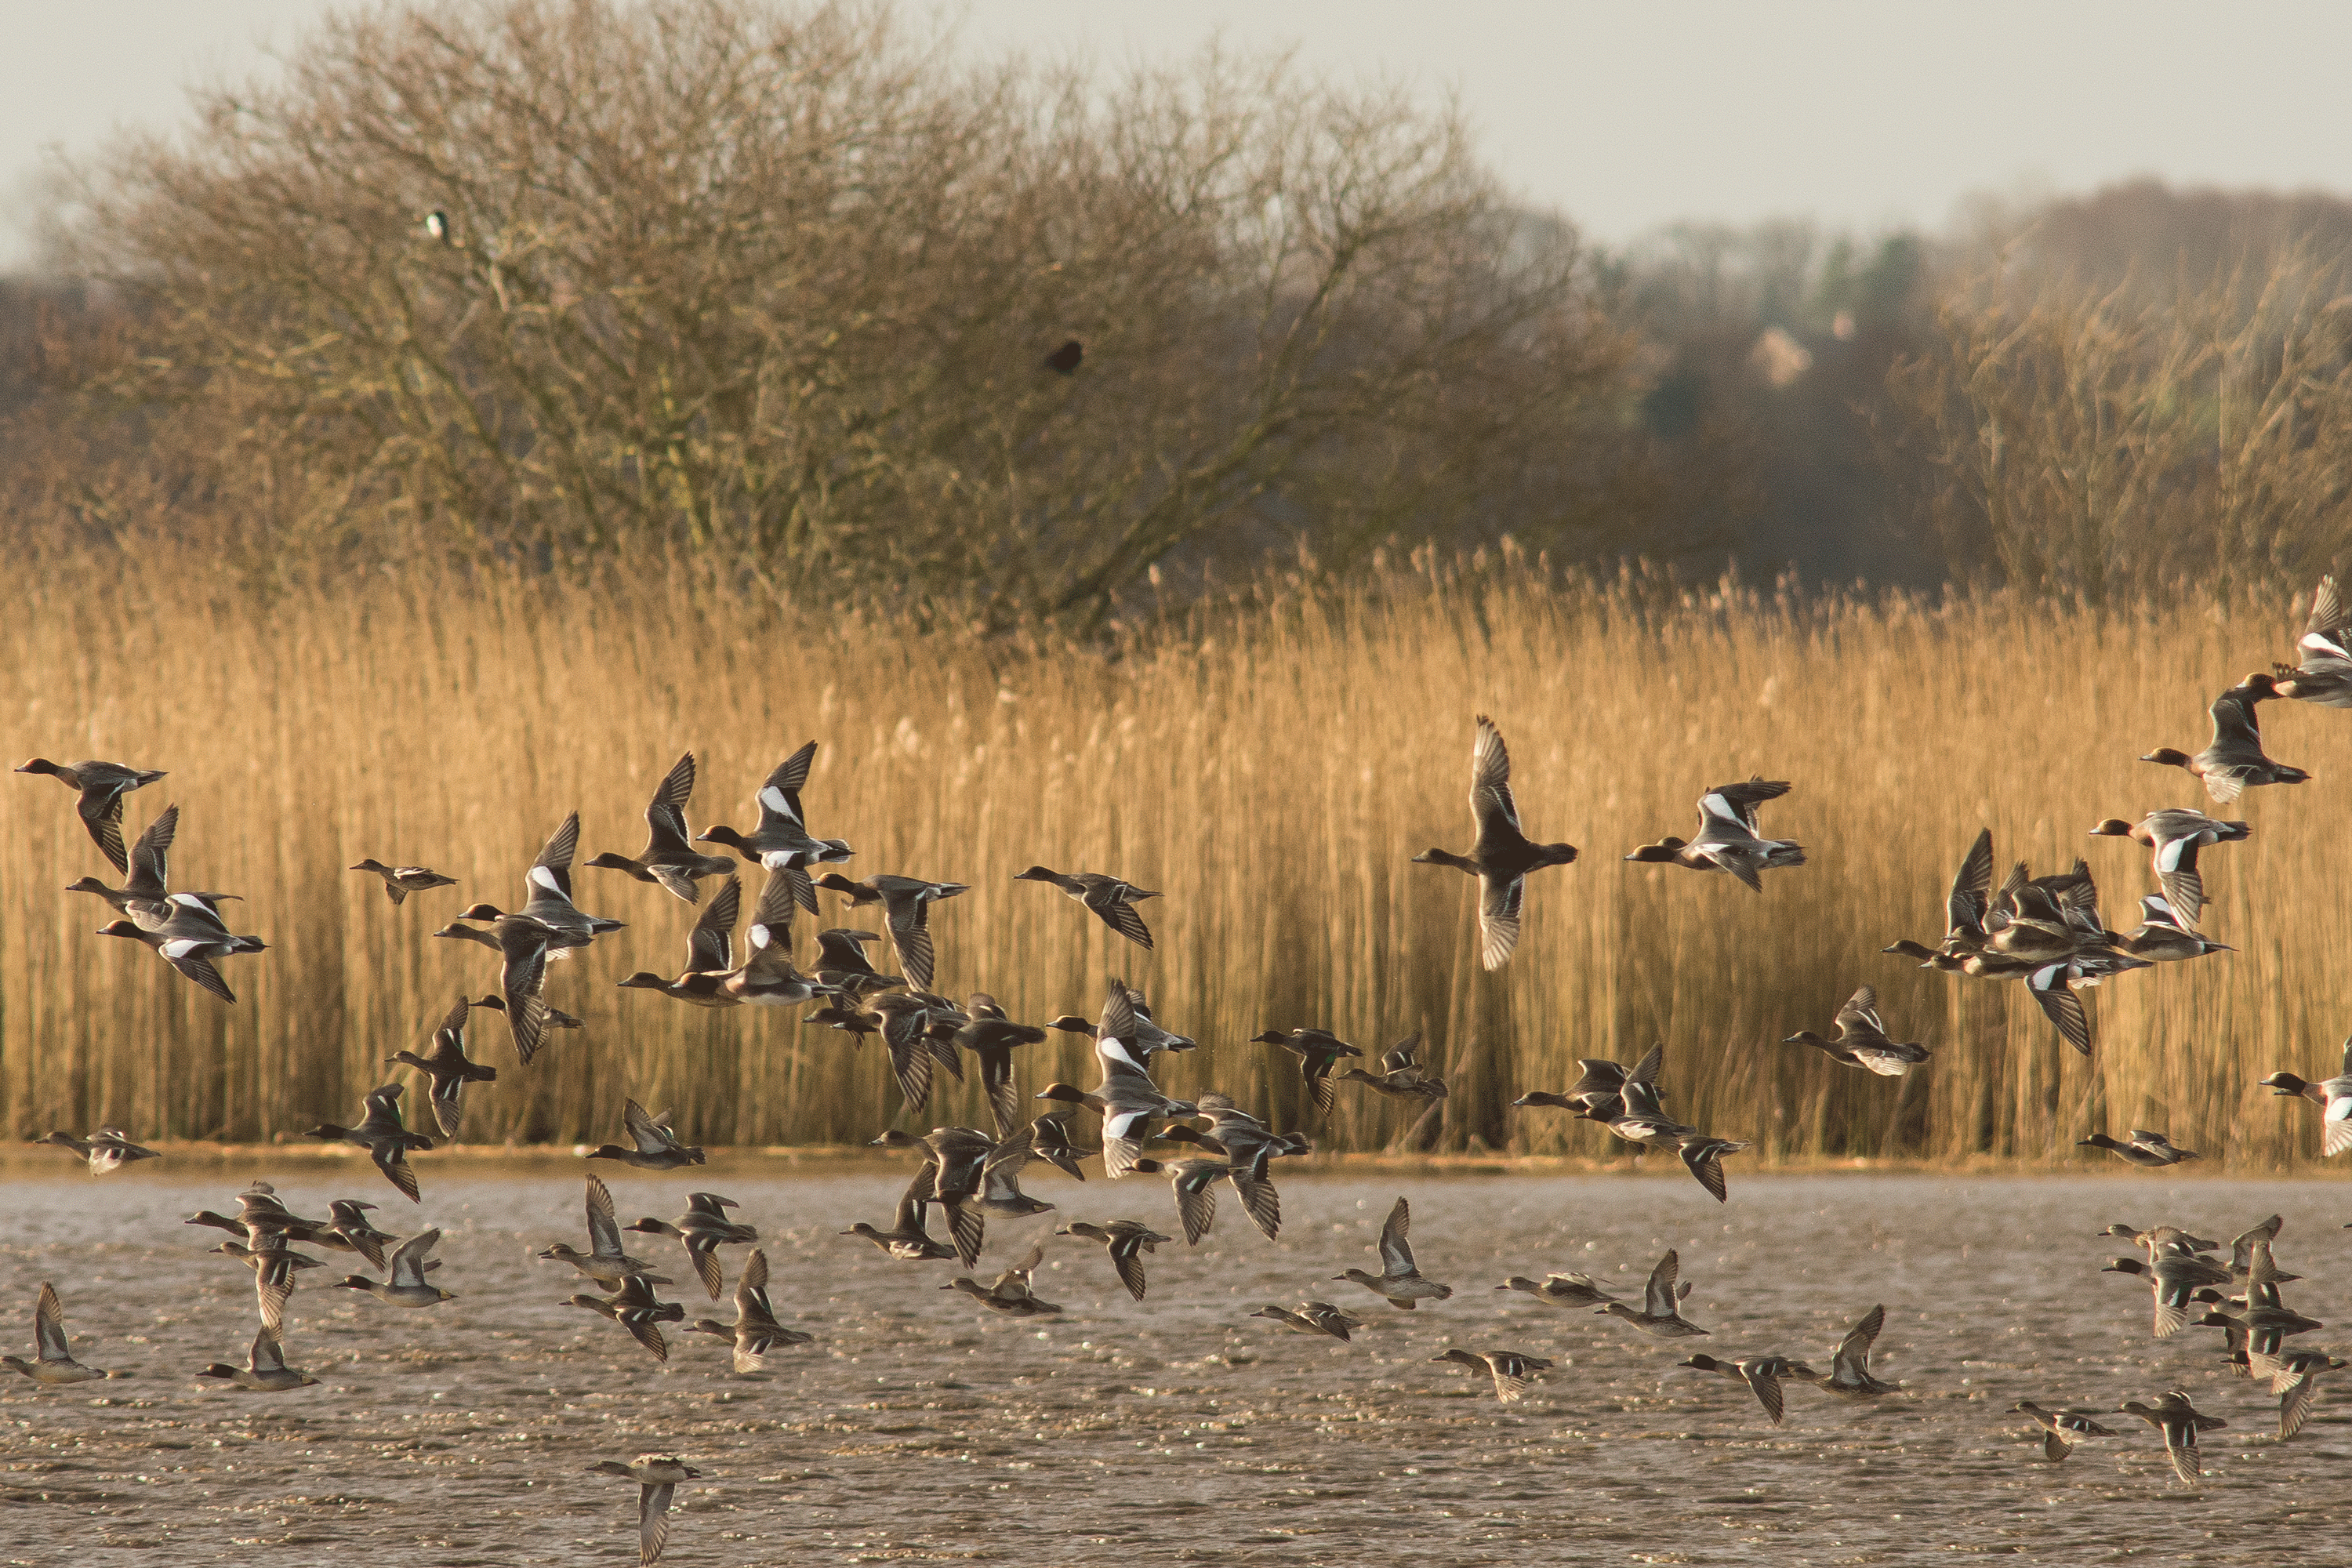 Ducks flying in front of the reed beds.